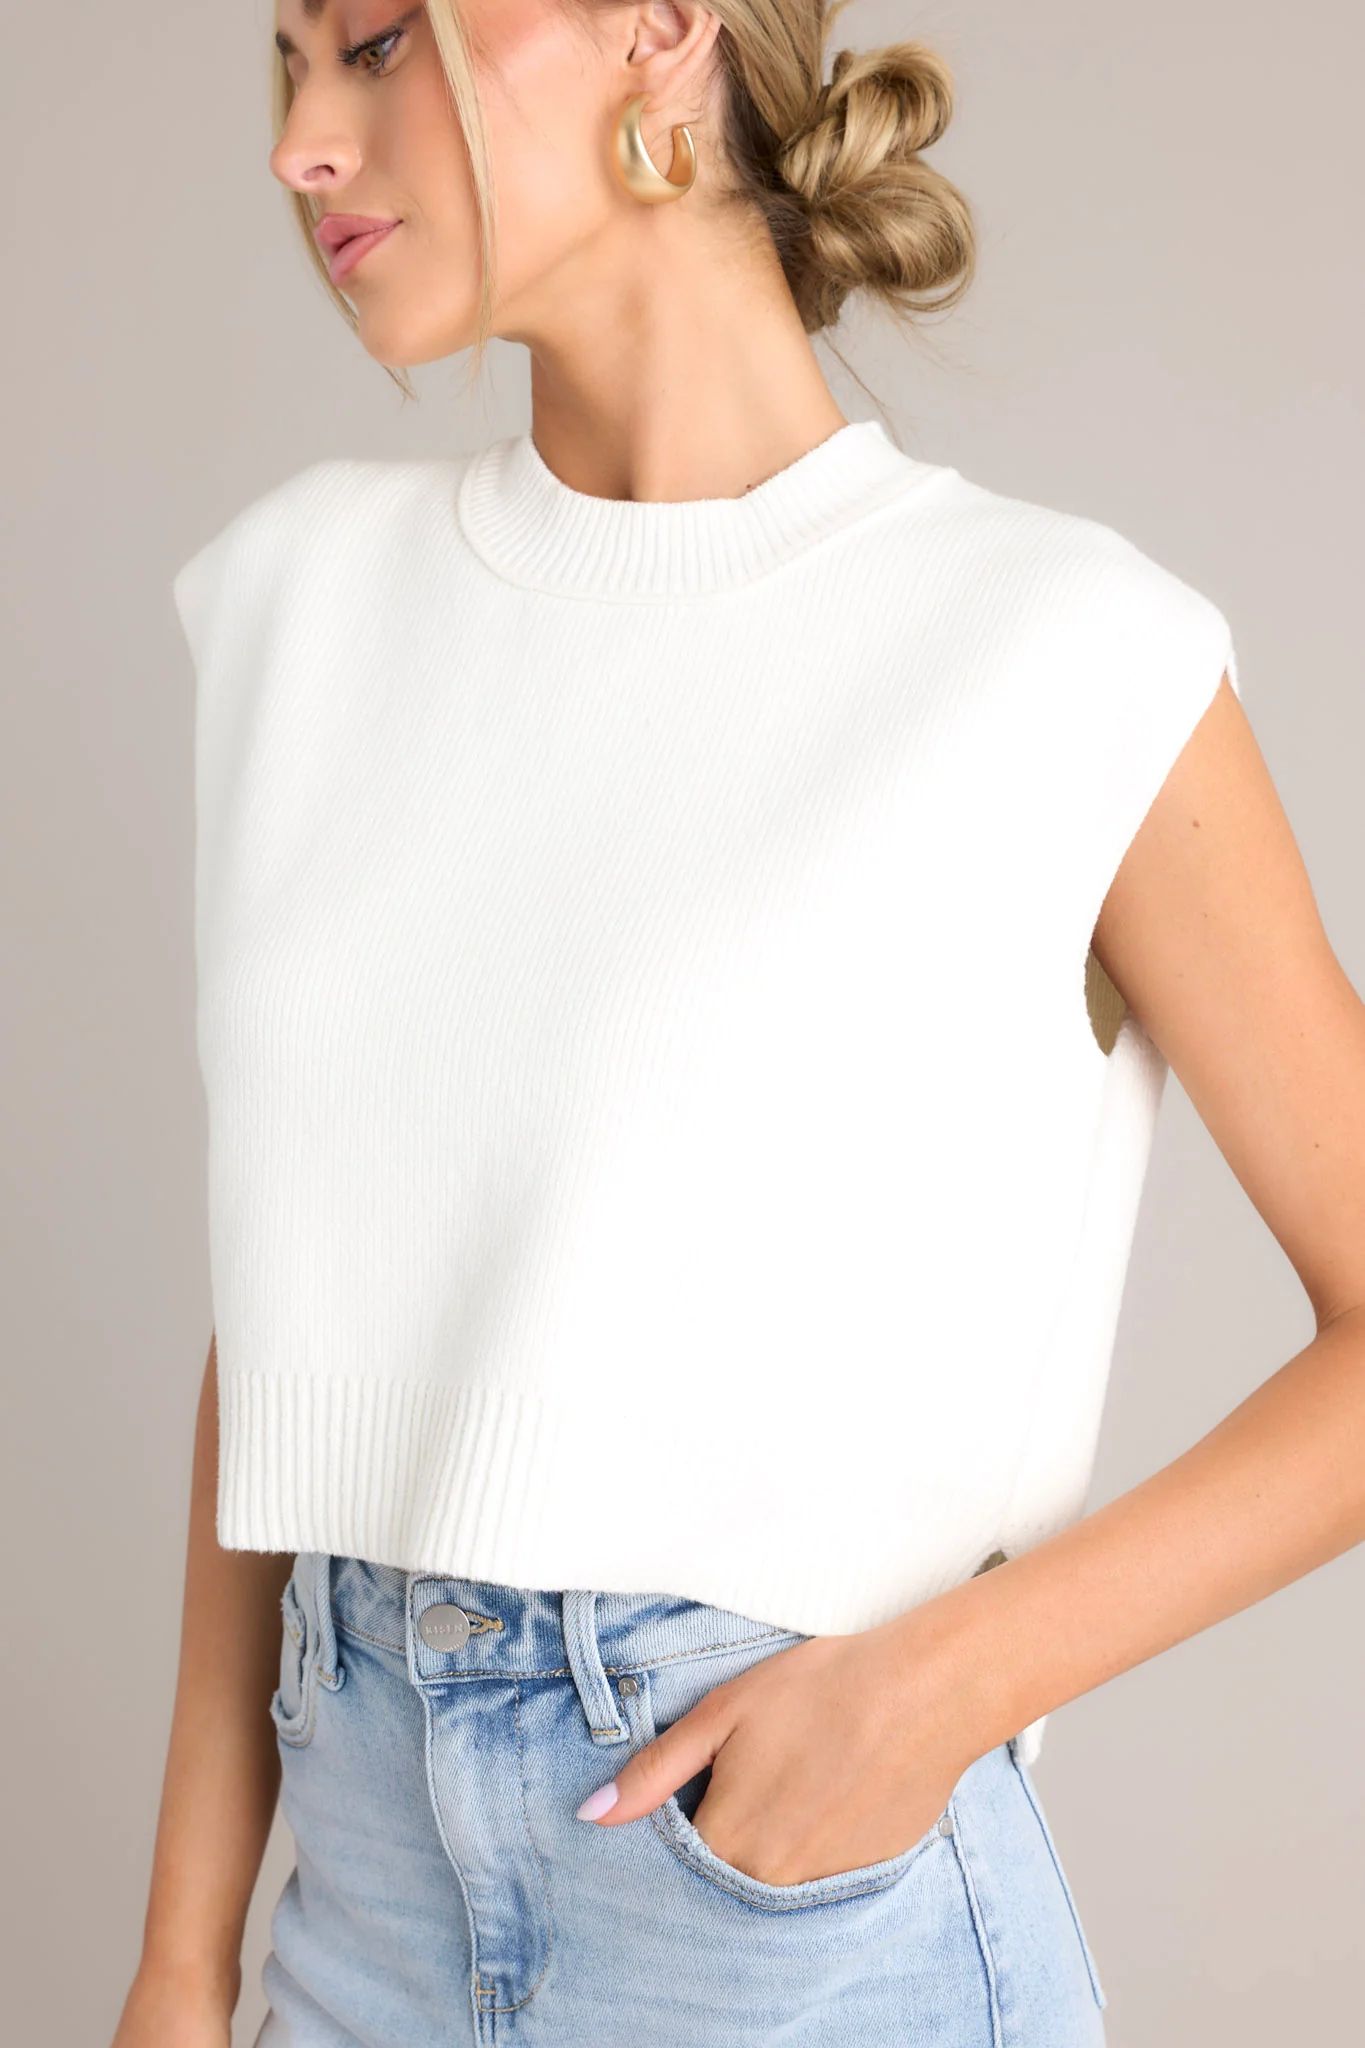 Sarcastically Yours White Sweater Crop Top | Red Dress